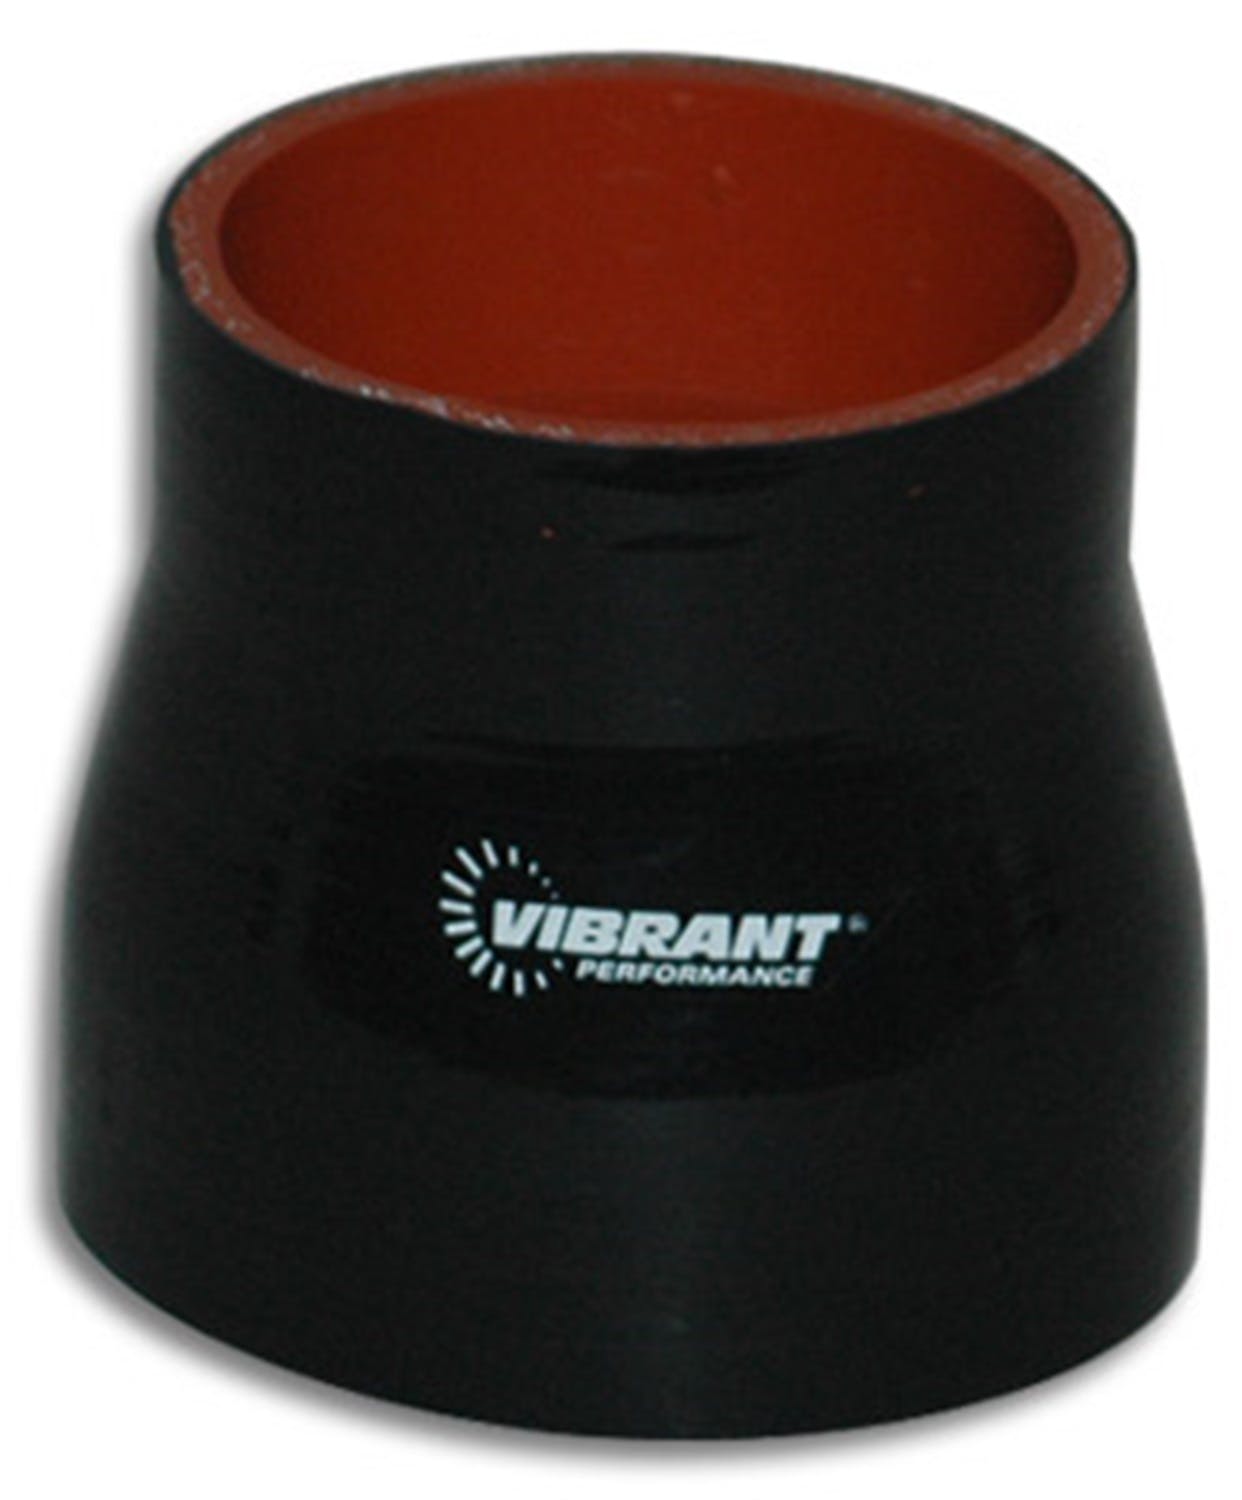 Vibrant Performance 2838 4 Ply Reducer Coupling, 1.75 inch x 2.5 inch x 3 inch Long - Black